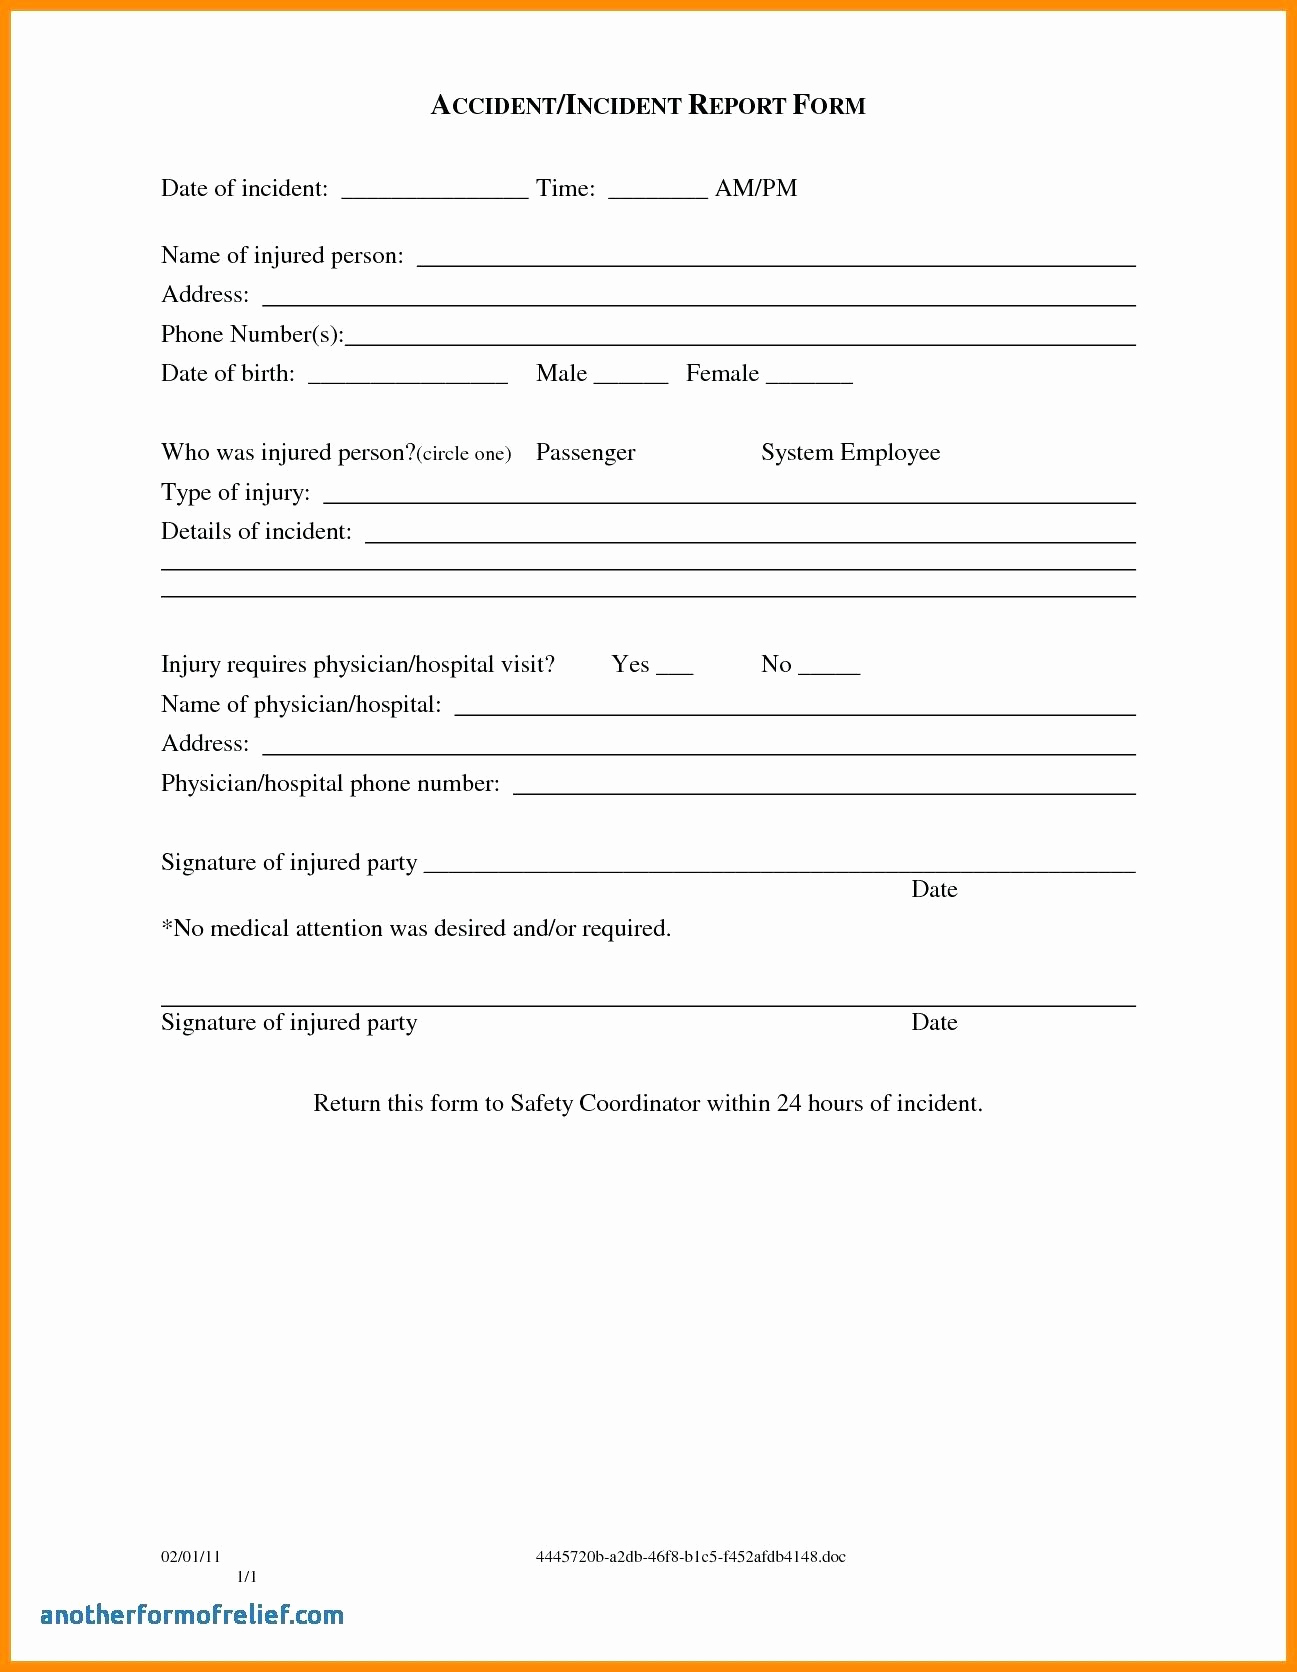 022 Template Ideas Accident Report Forms Incident Hazard For Throughout Hazard Incident Report Form Template